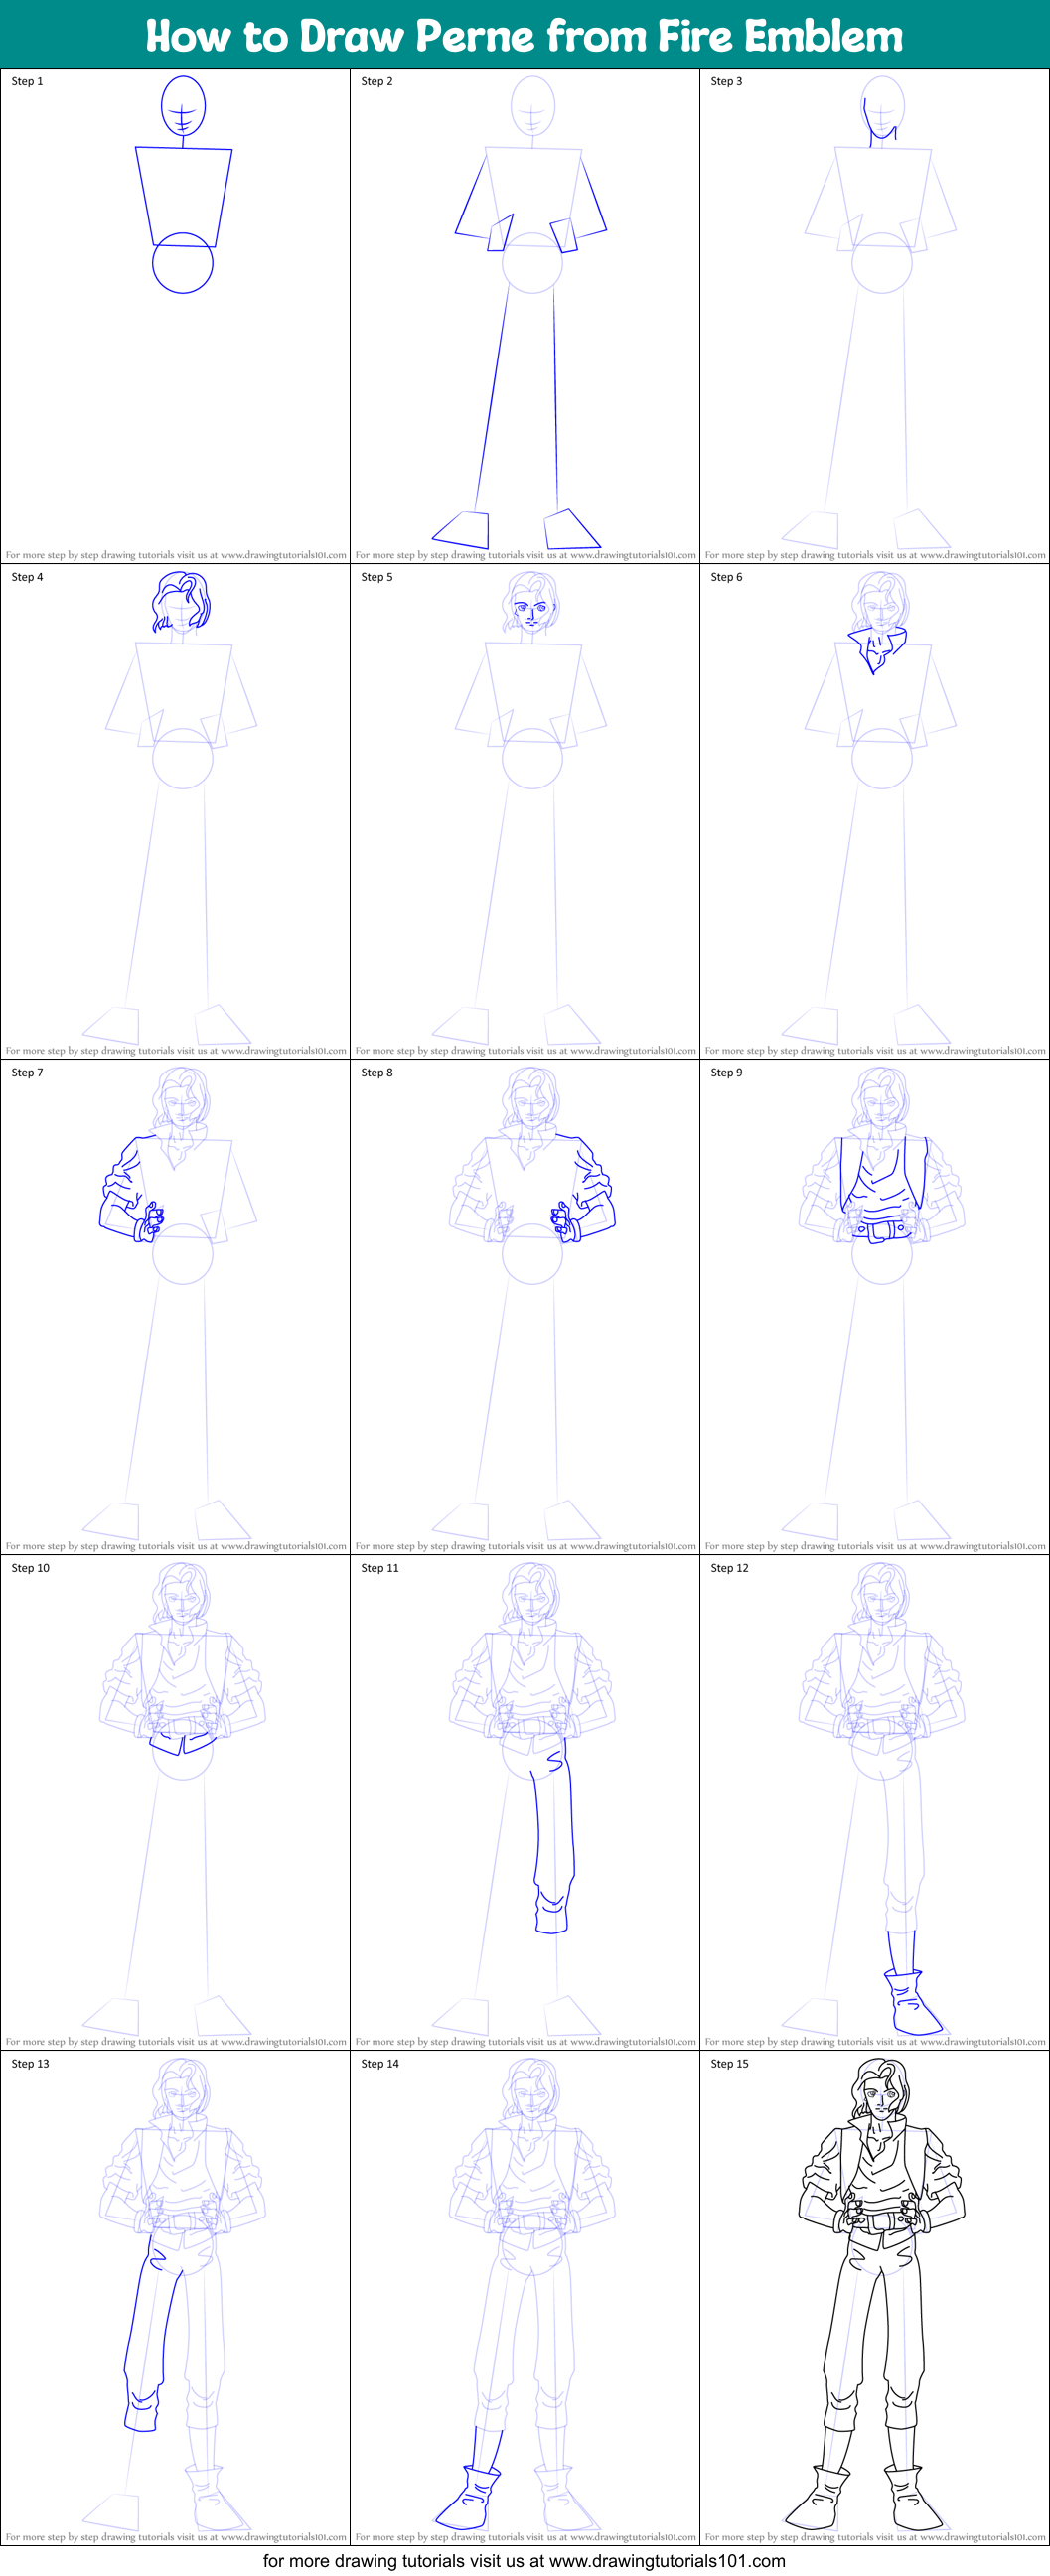 How to Draw Perne from Fire Emblem printable step by step drawing sheet ...